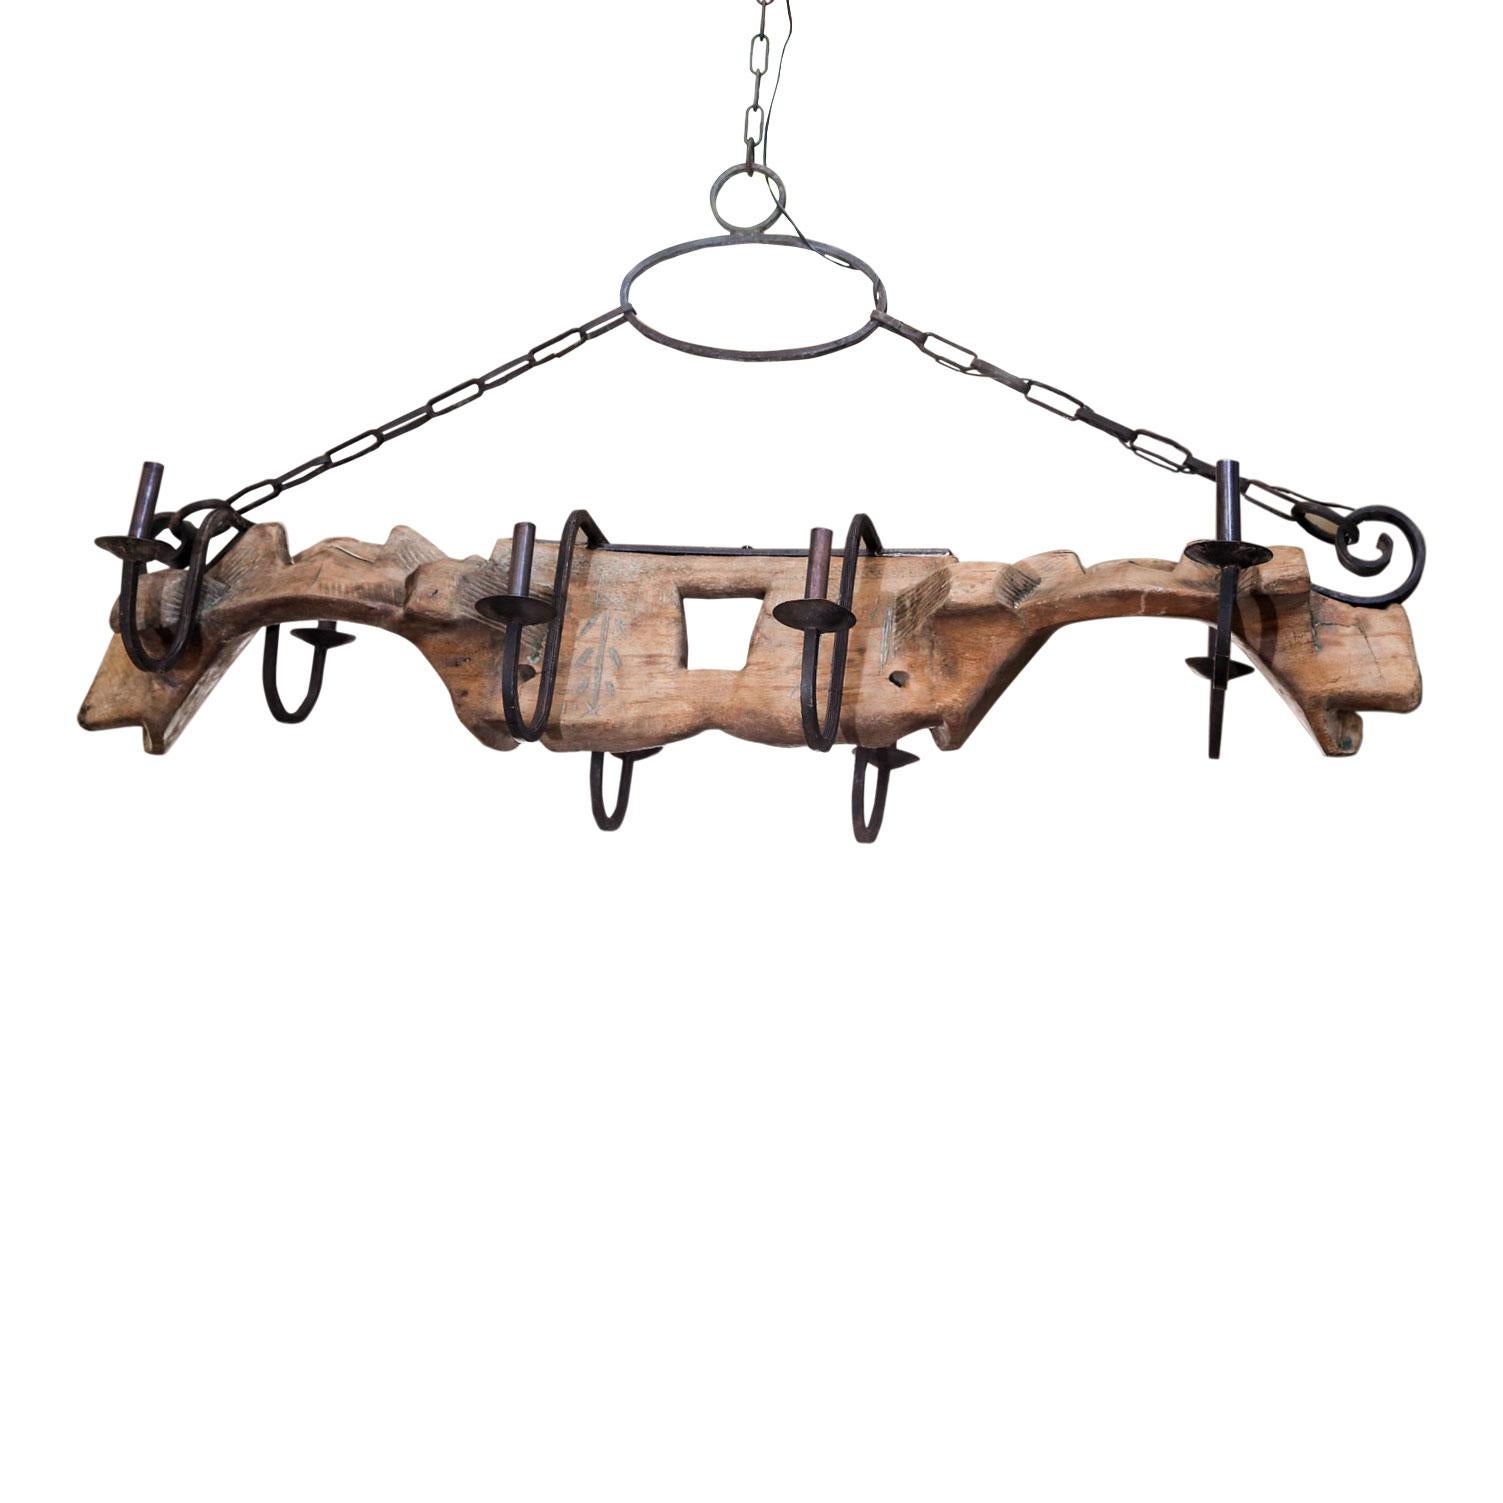 Hand-Carved Unusual  French Yoke Chandelier hand-carved wood and iron billard light